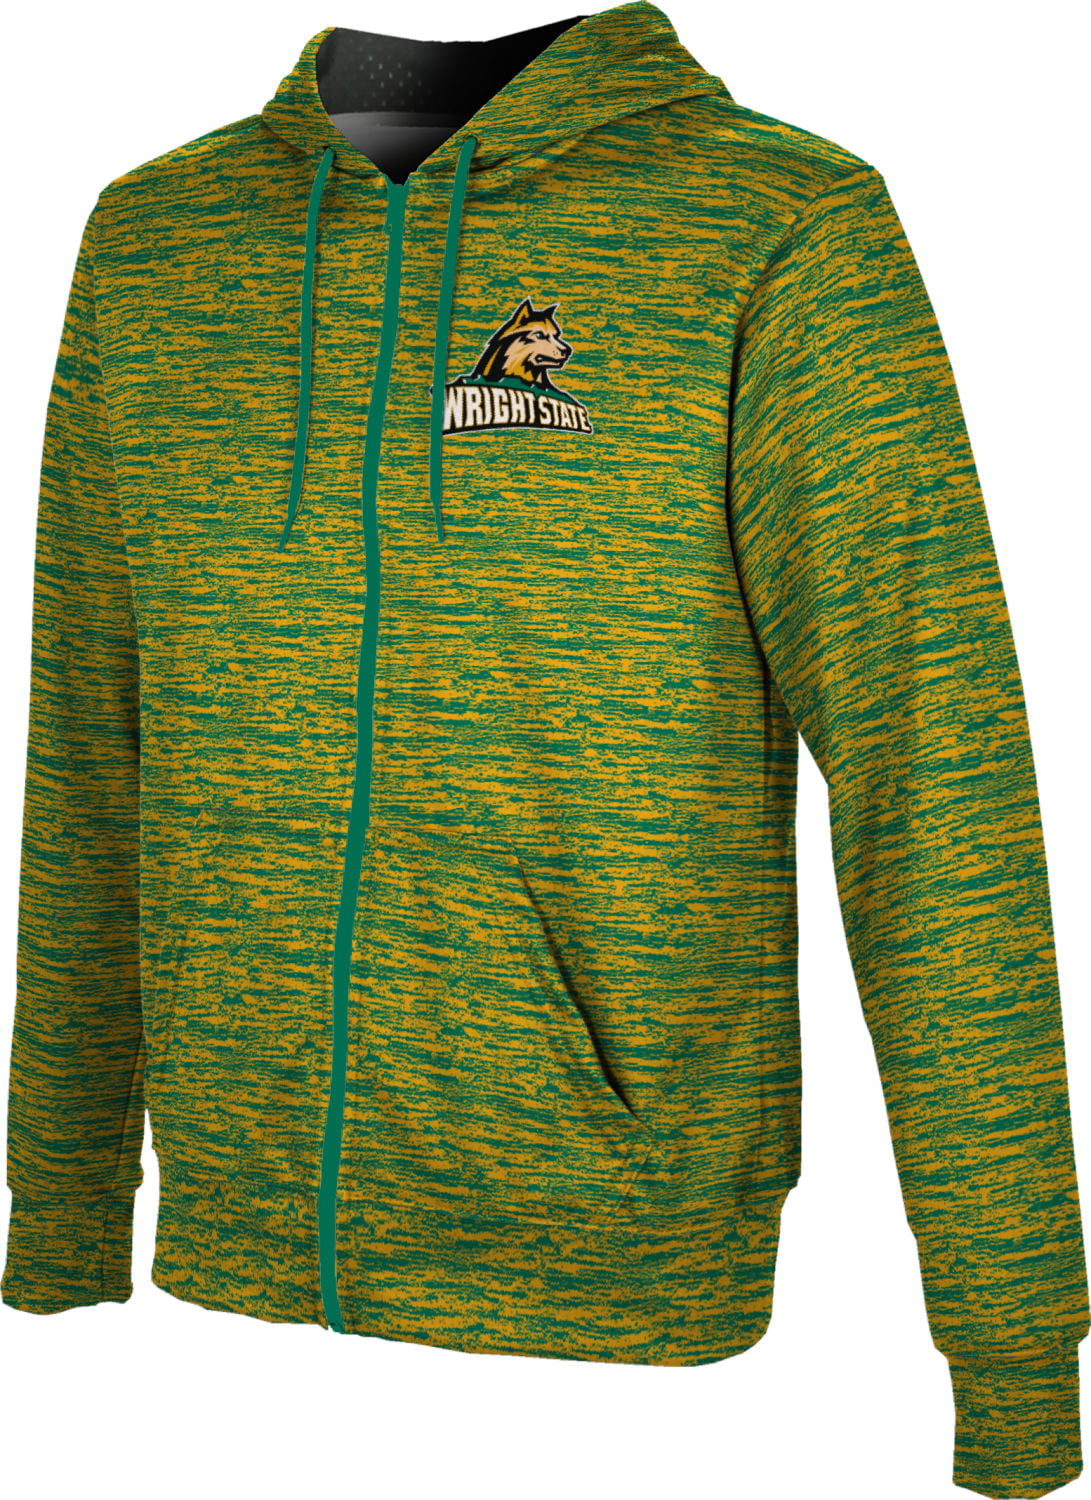 Structure ProSphere Cleveland State University Mens Full Zip Hoodie 